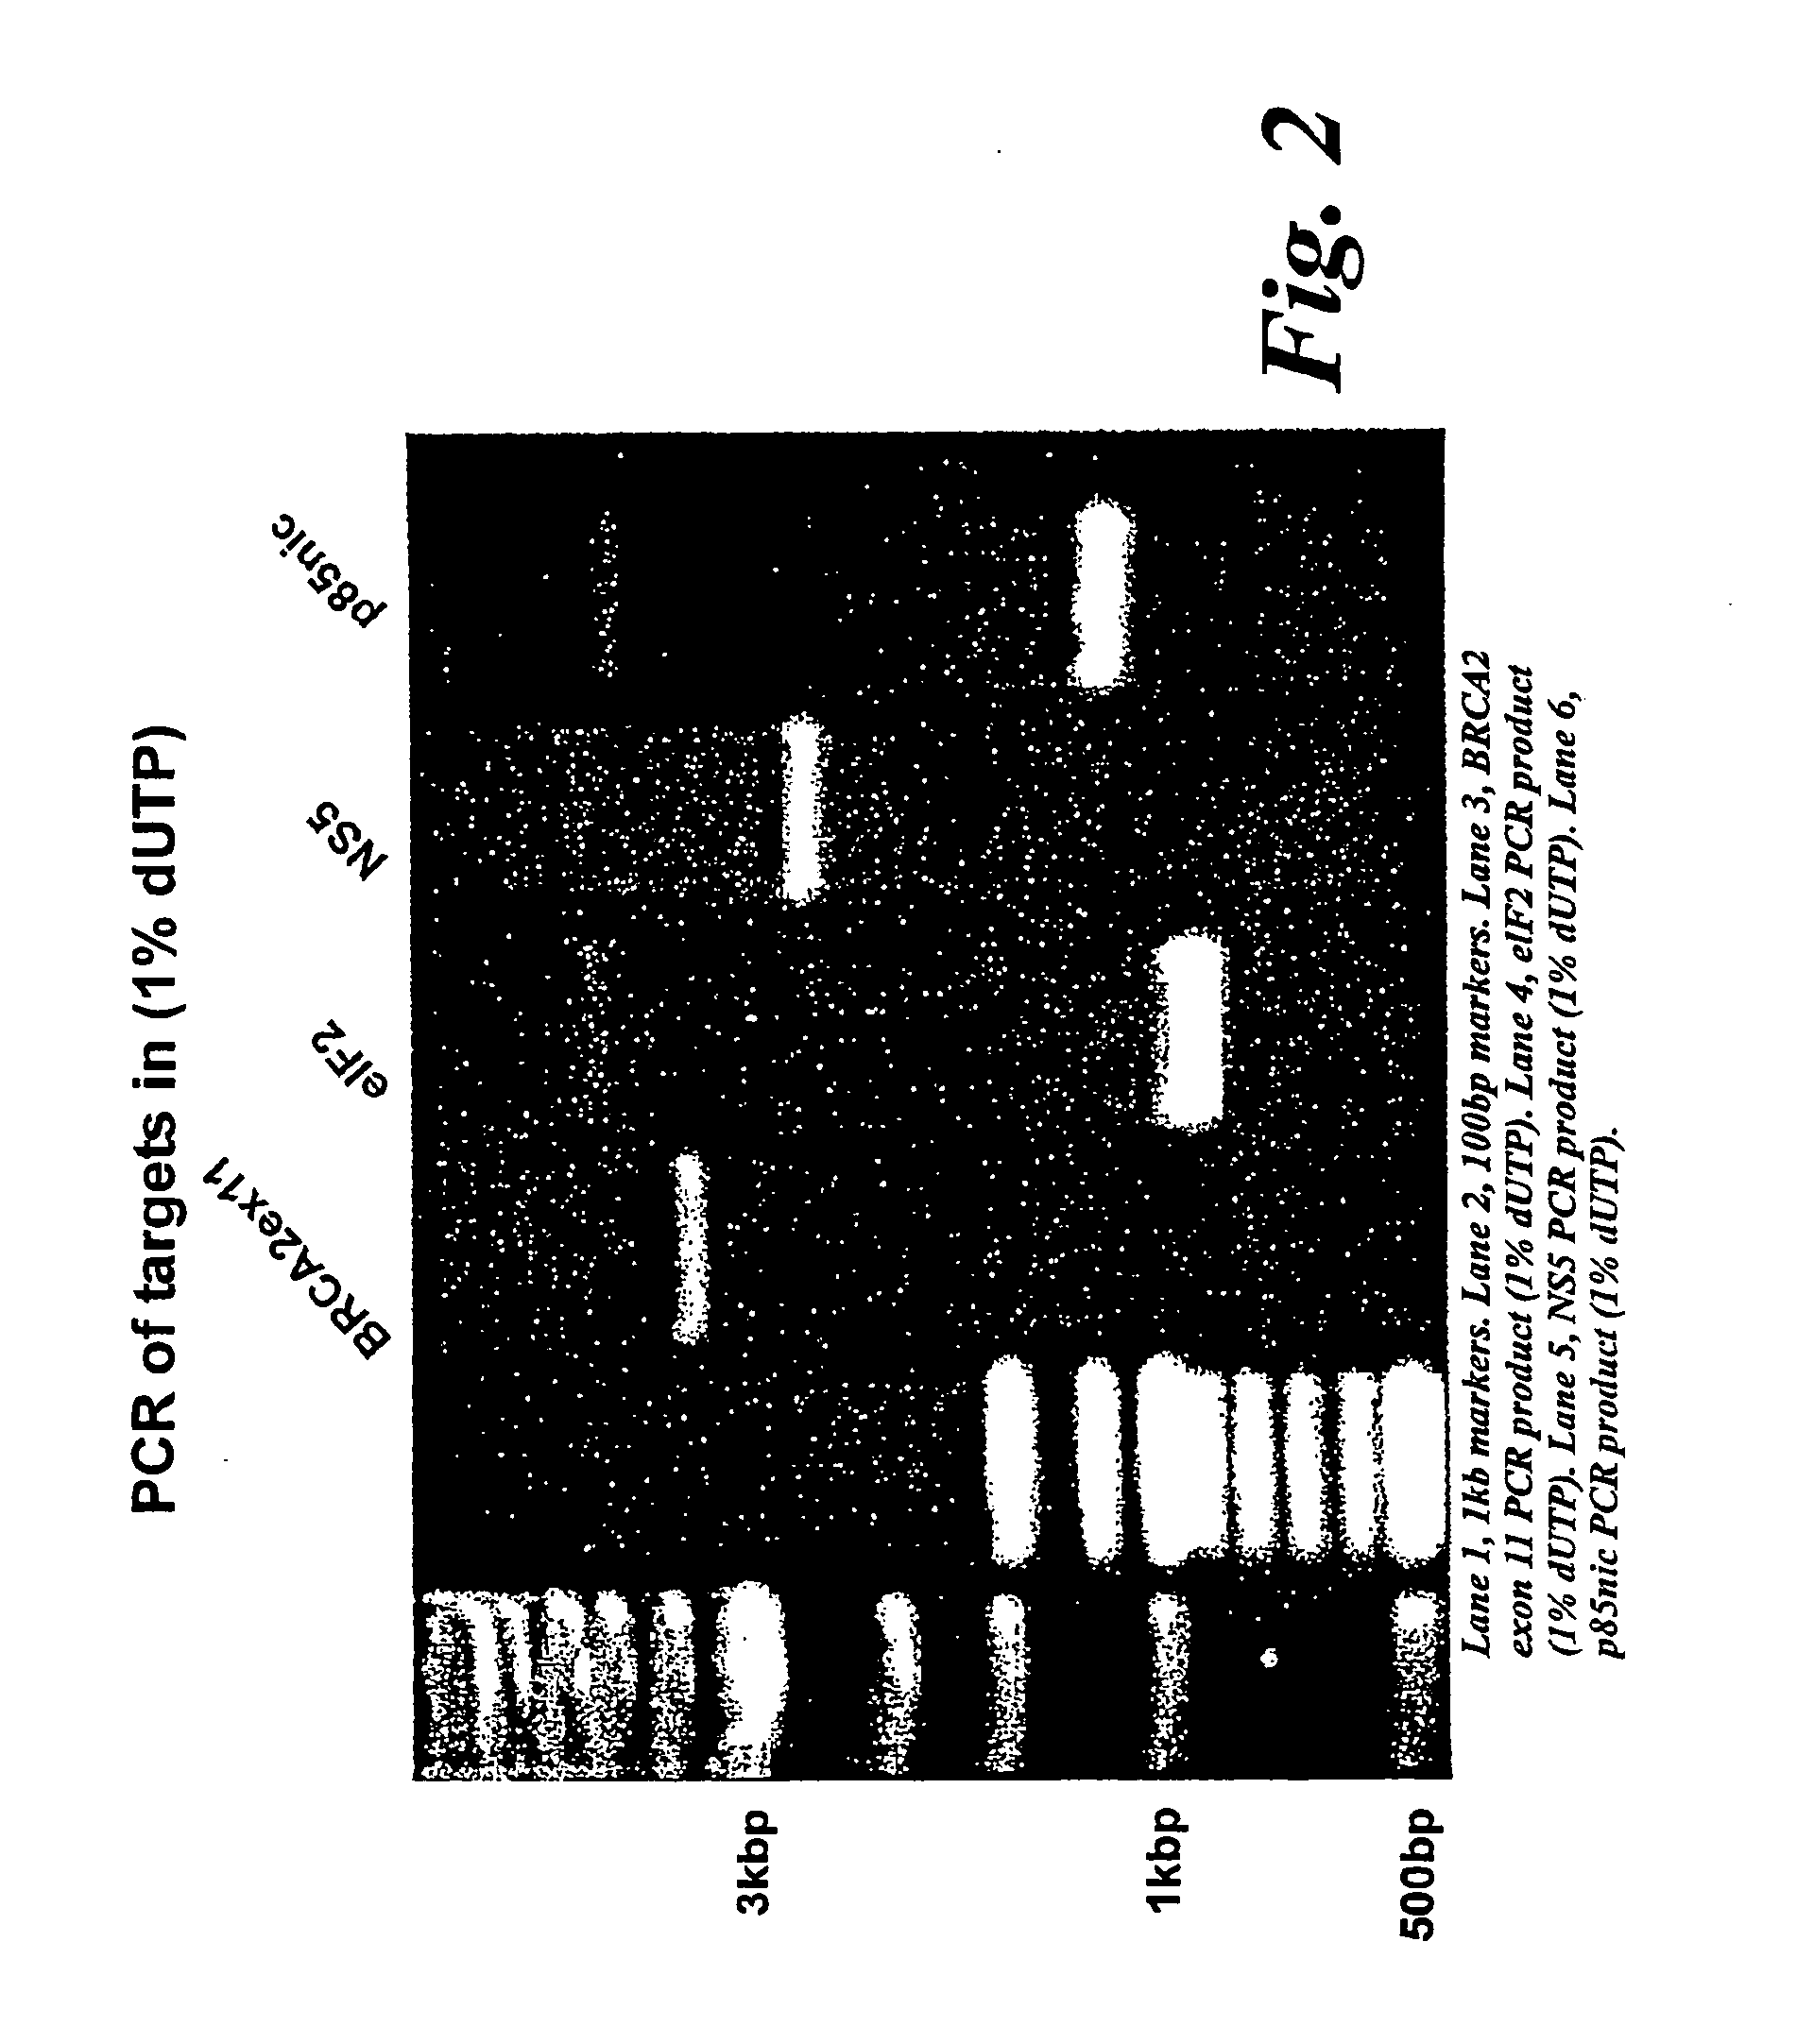 Method for producing and identifying soluble protein domains